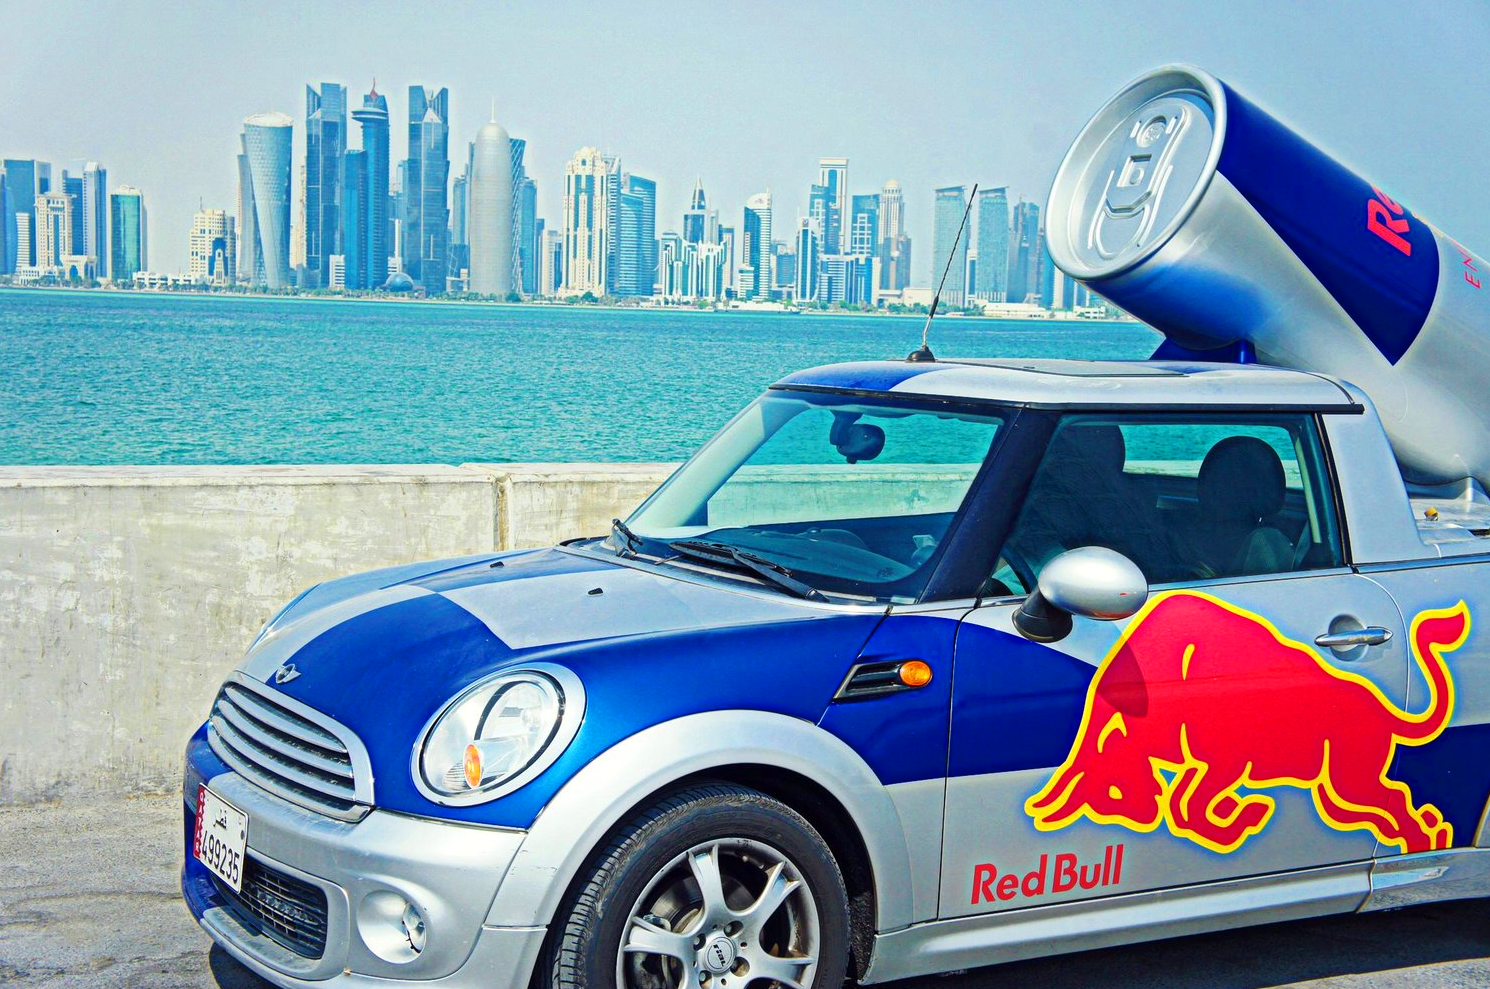 What Was The Red Bull Car The Daily Drive Consumer Guide The Daily Drive Consumer Guide